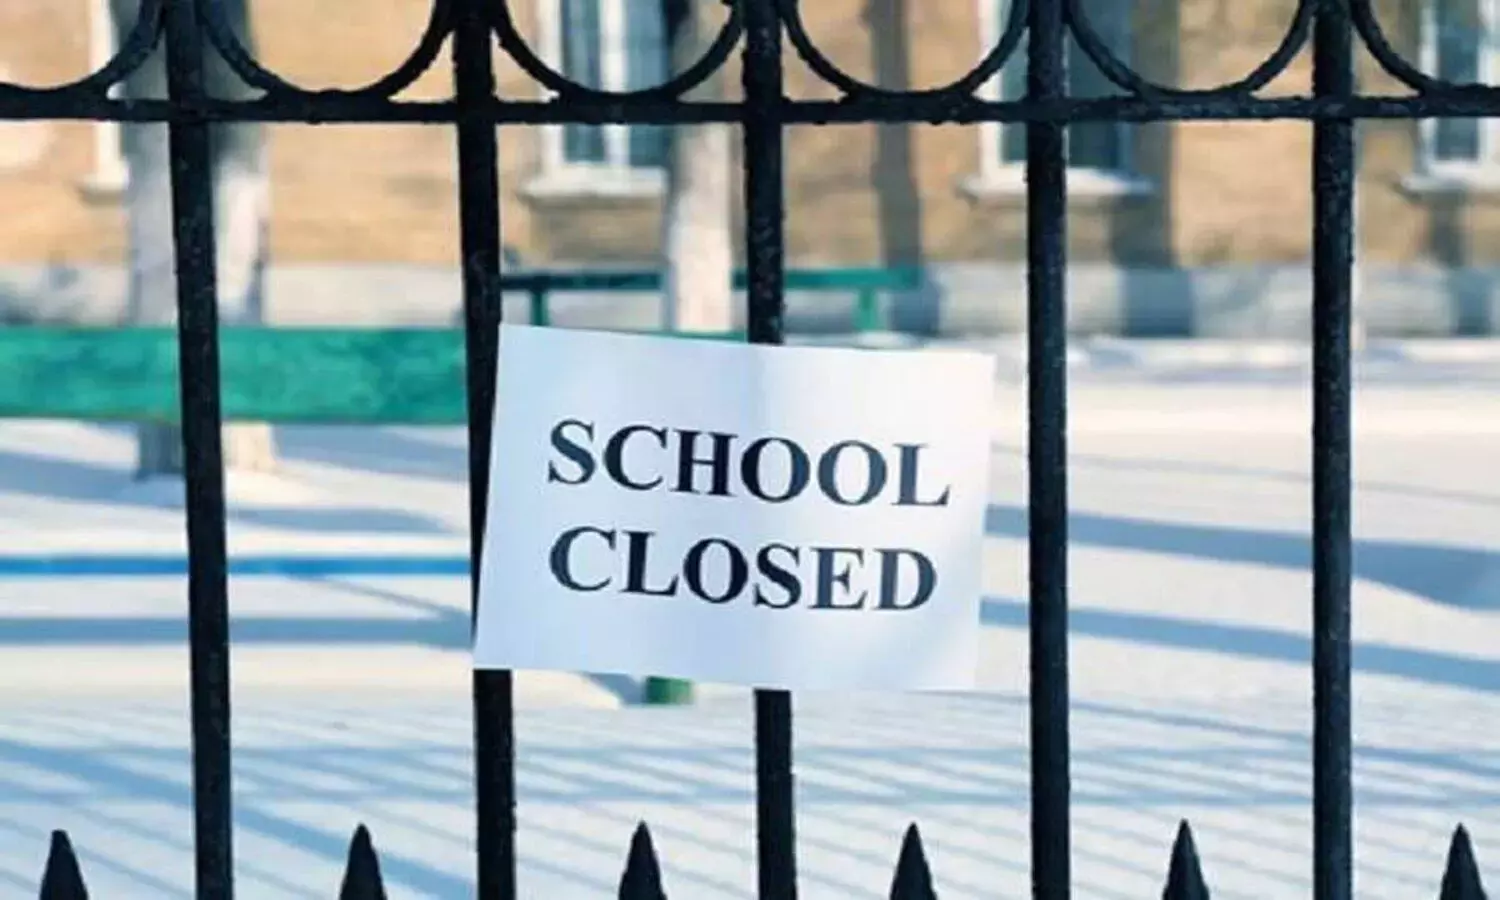 All schools up to 12th in Agra will remain closed for two days, DM issued order